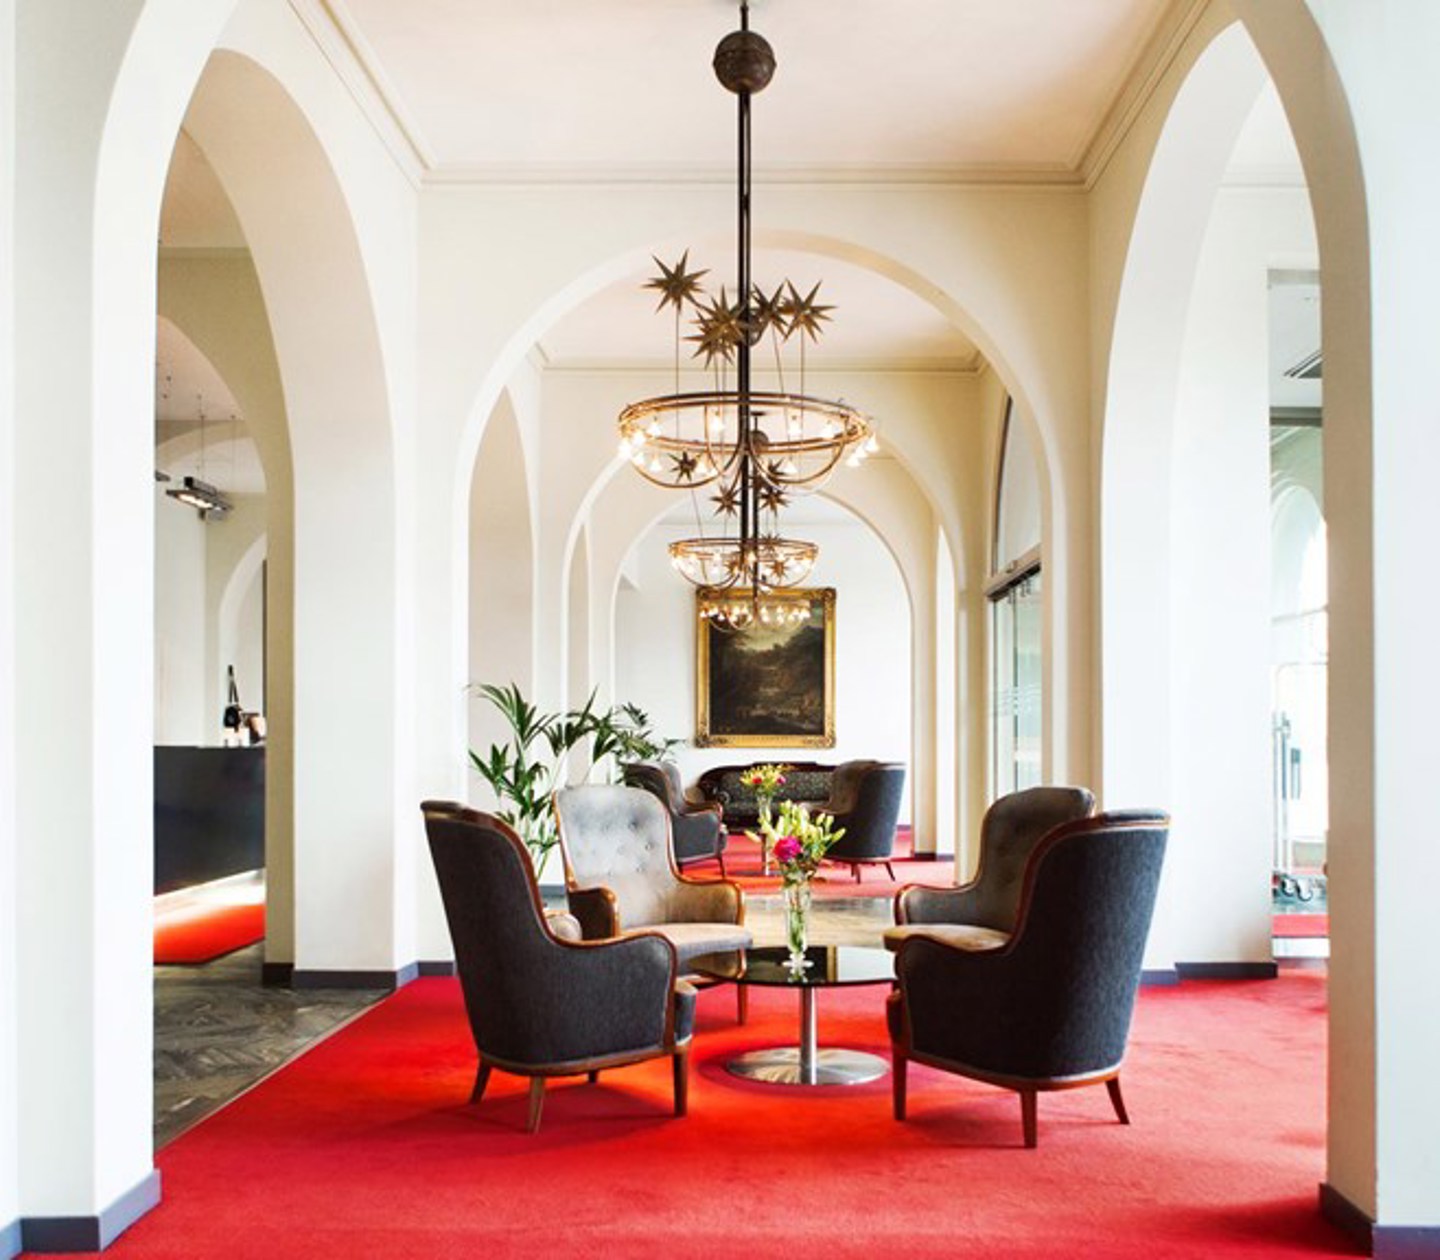 A lobby with armchairs